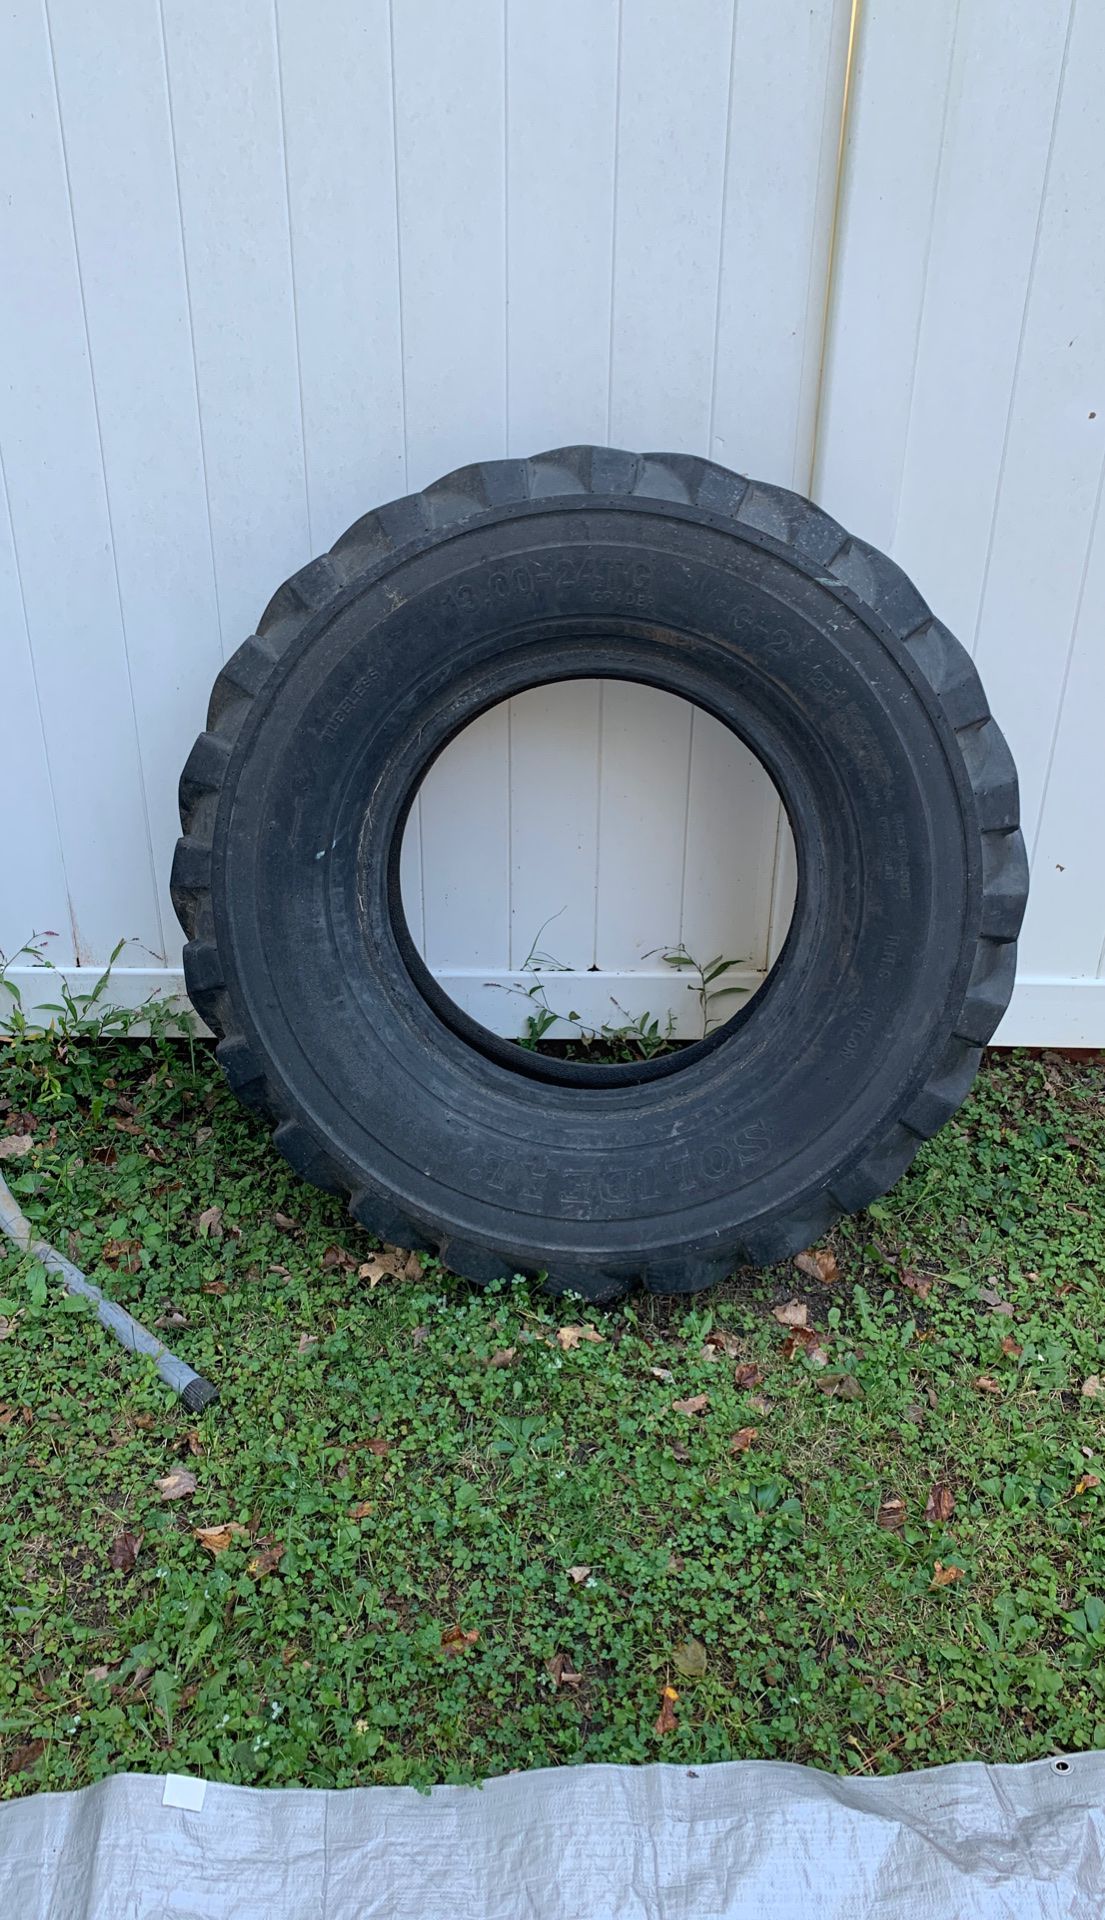 Workout/strongman Tire for flipping